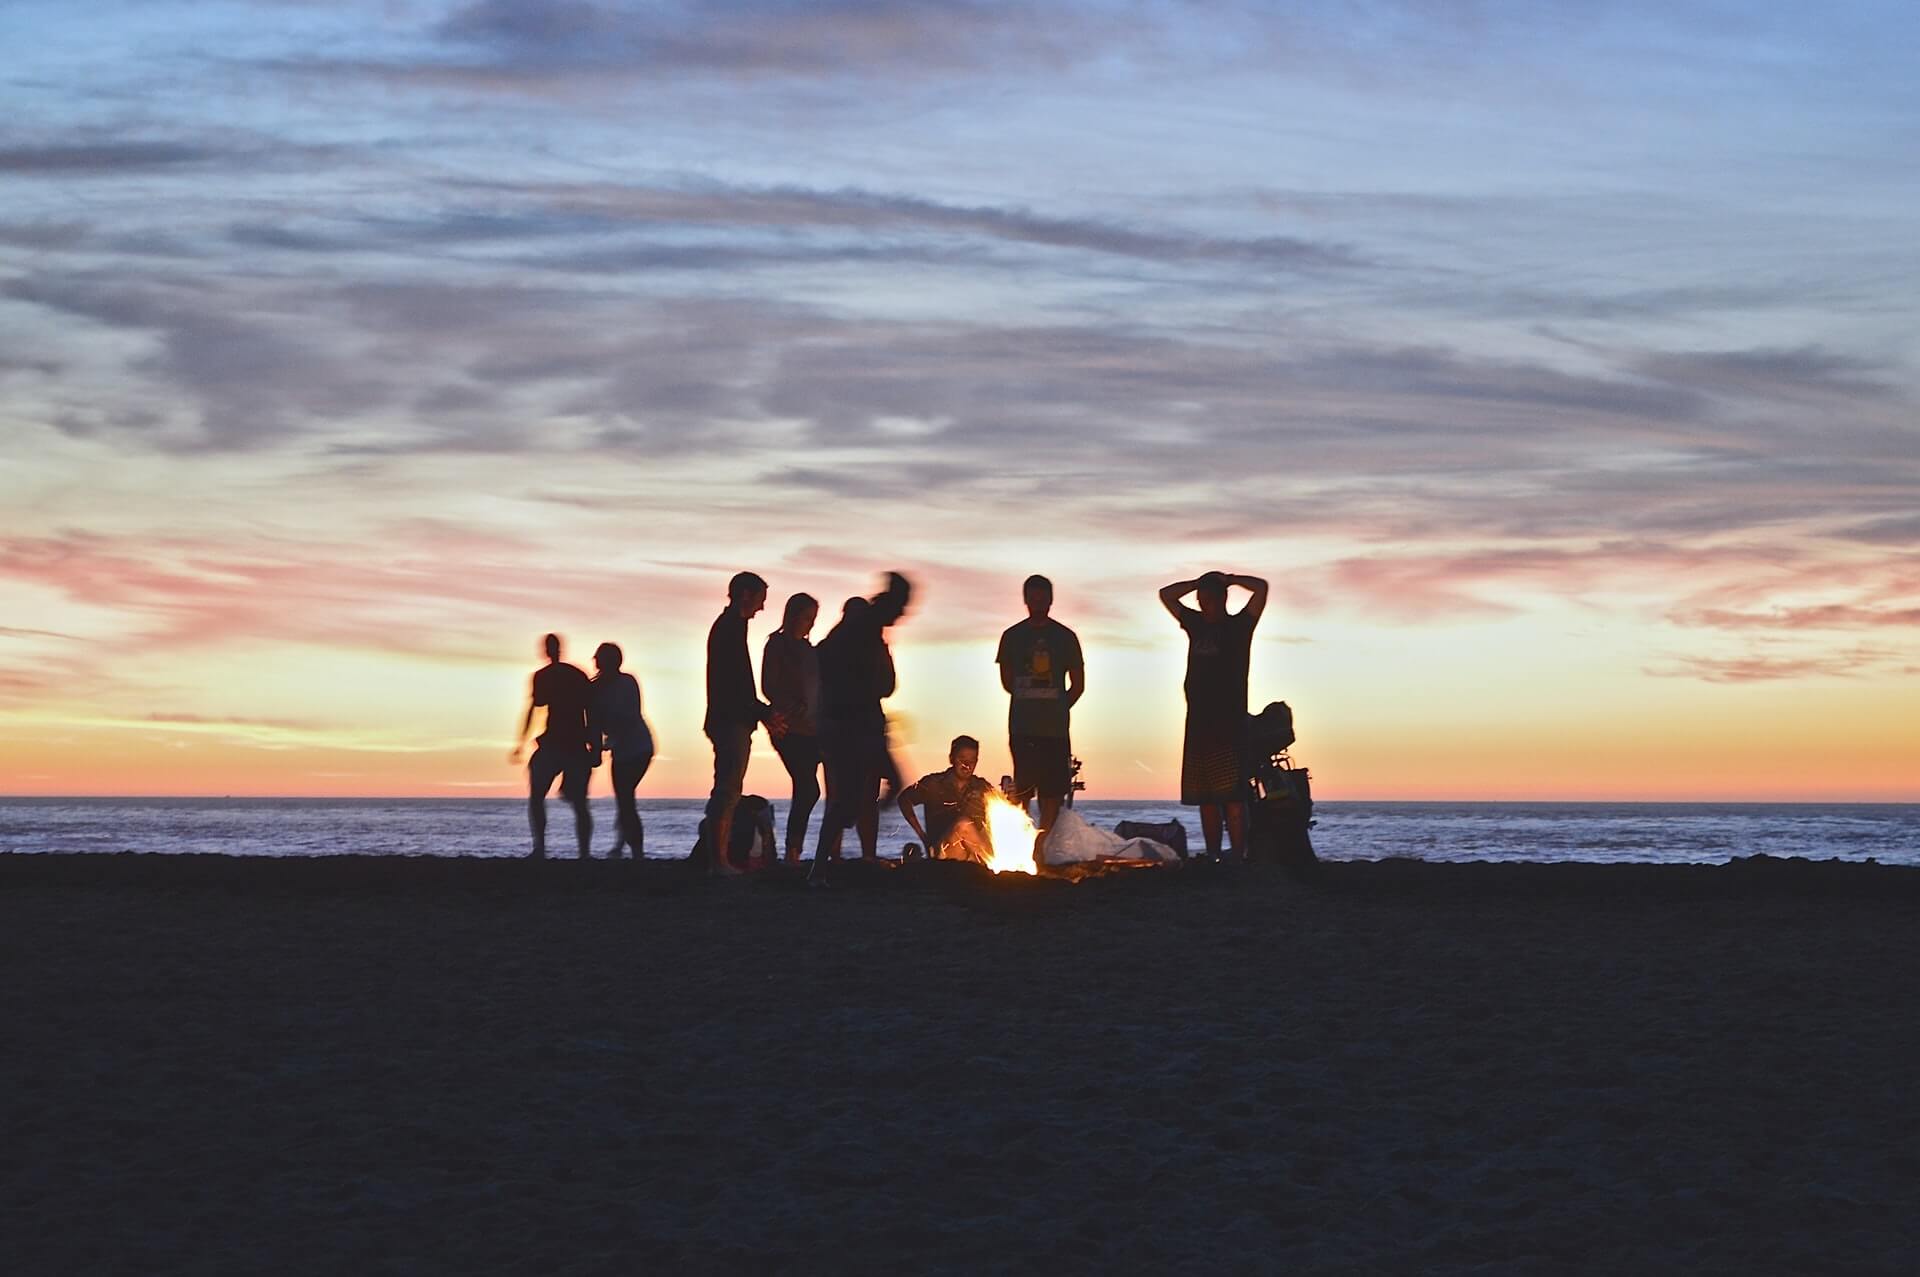 A group of people having a fire on a beach at sunset.